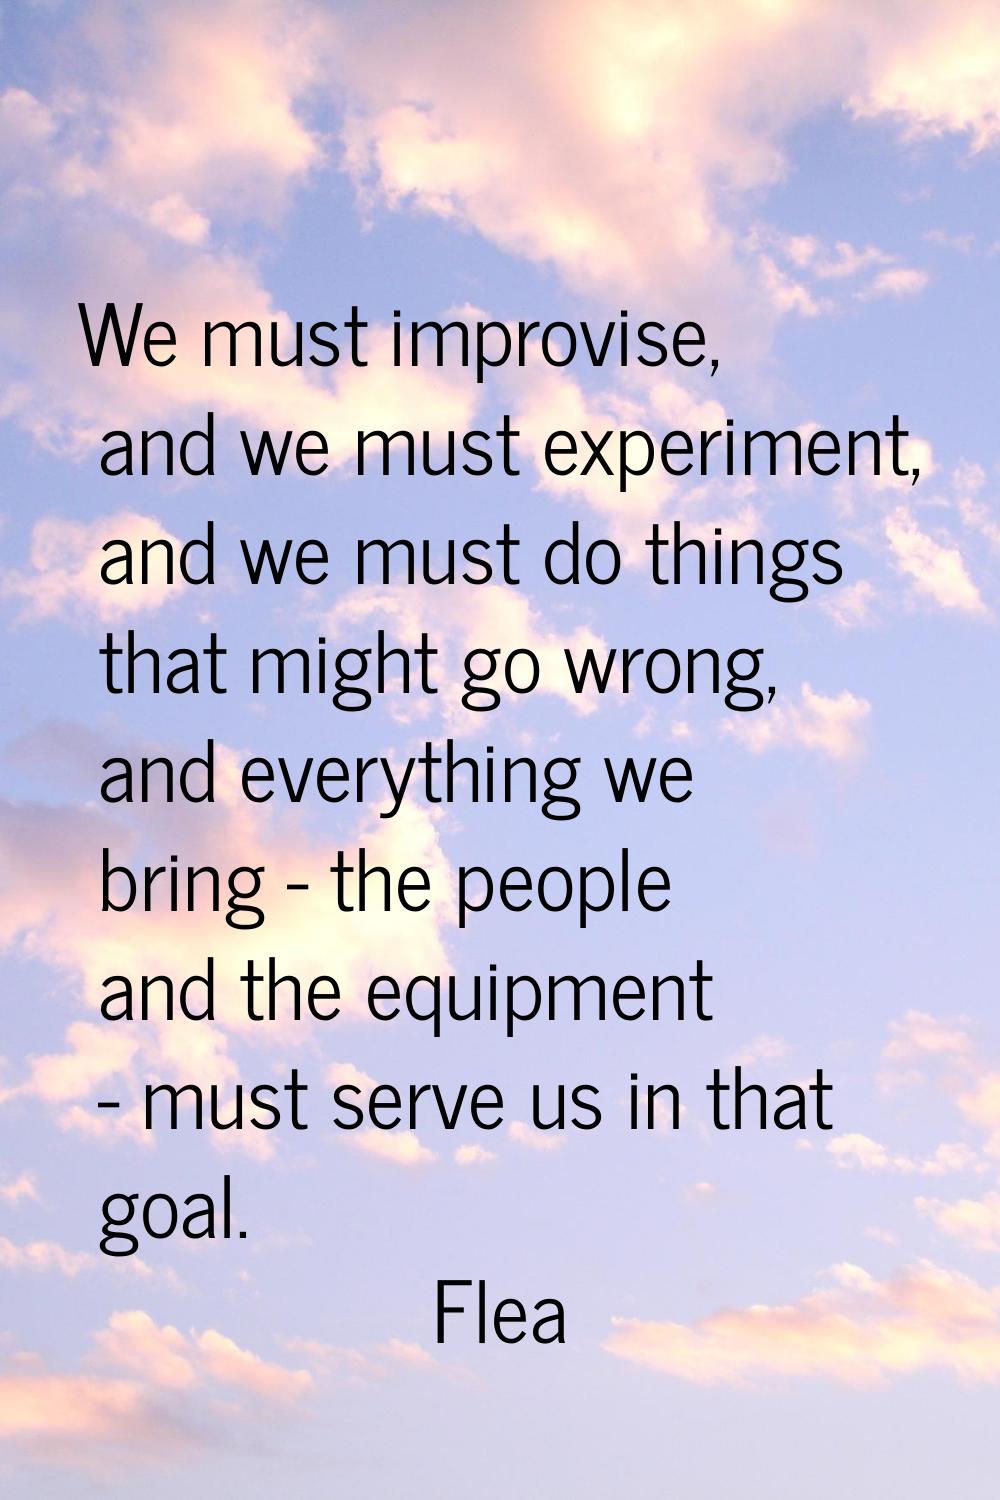 We must improvise, and we must experiment, and we must do things that might go wrong, and everythin